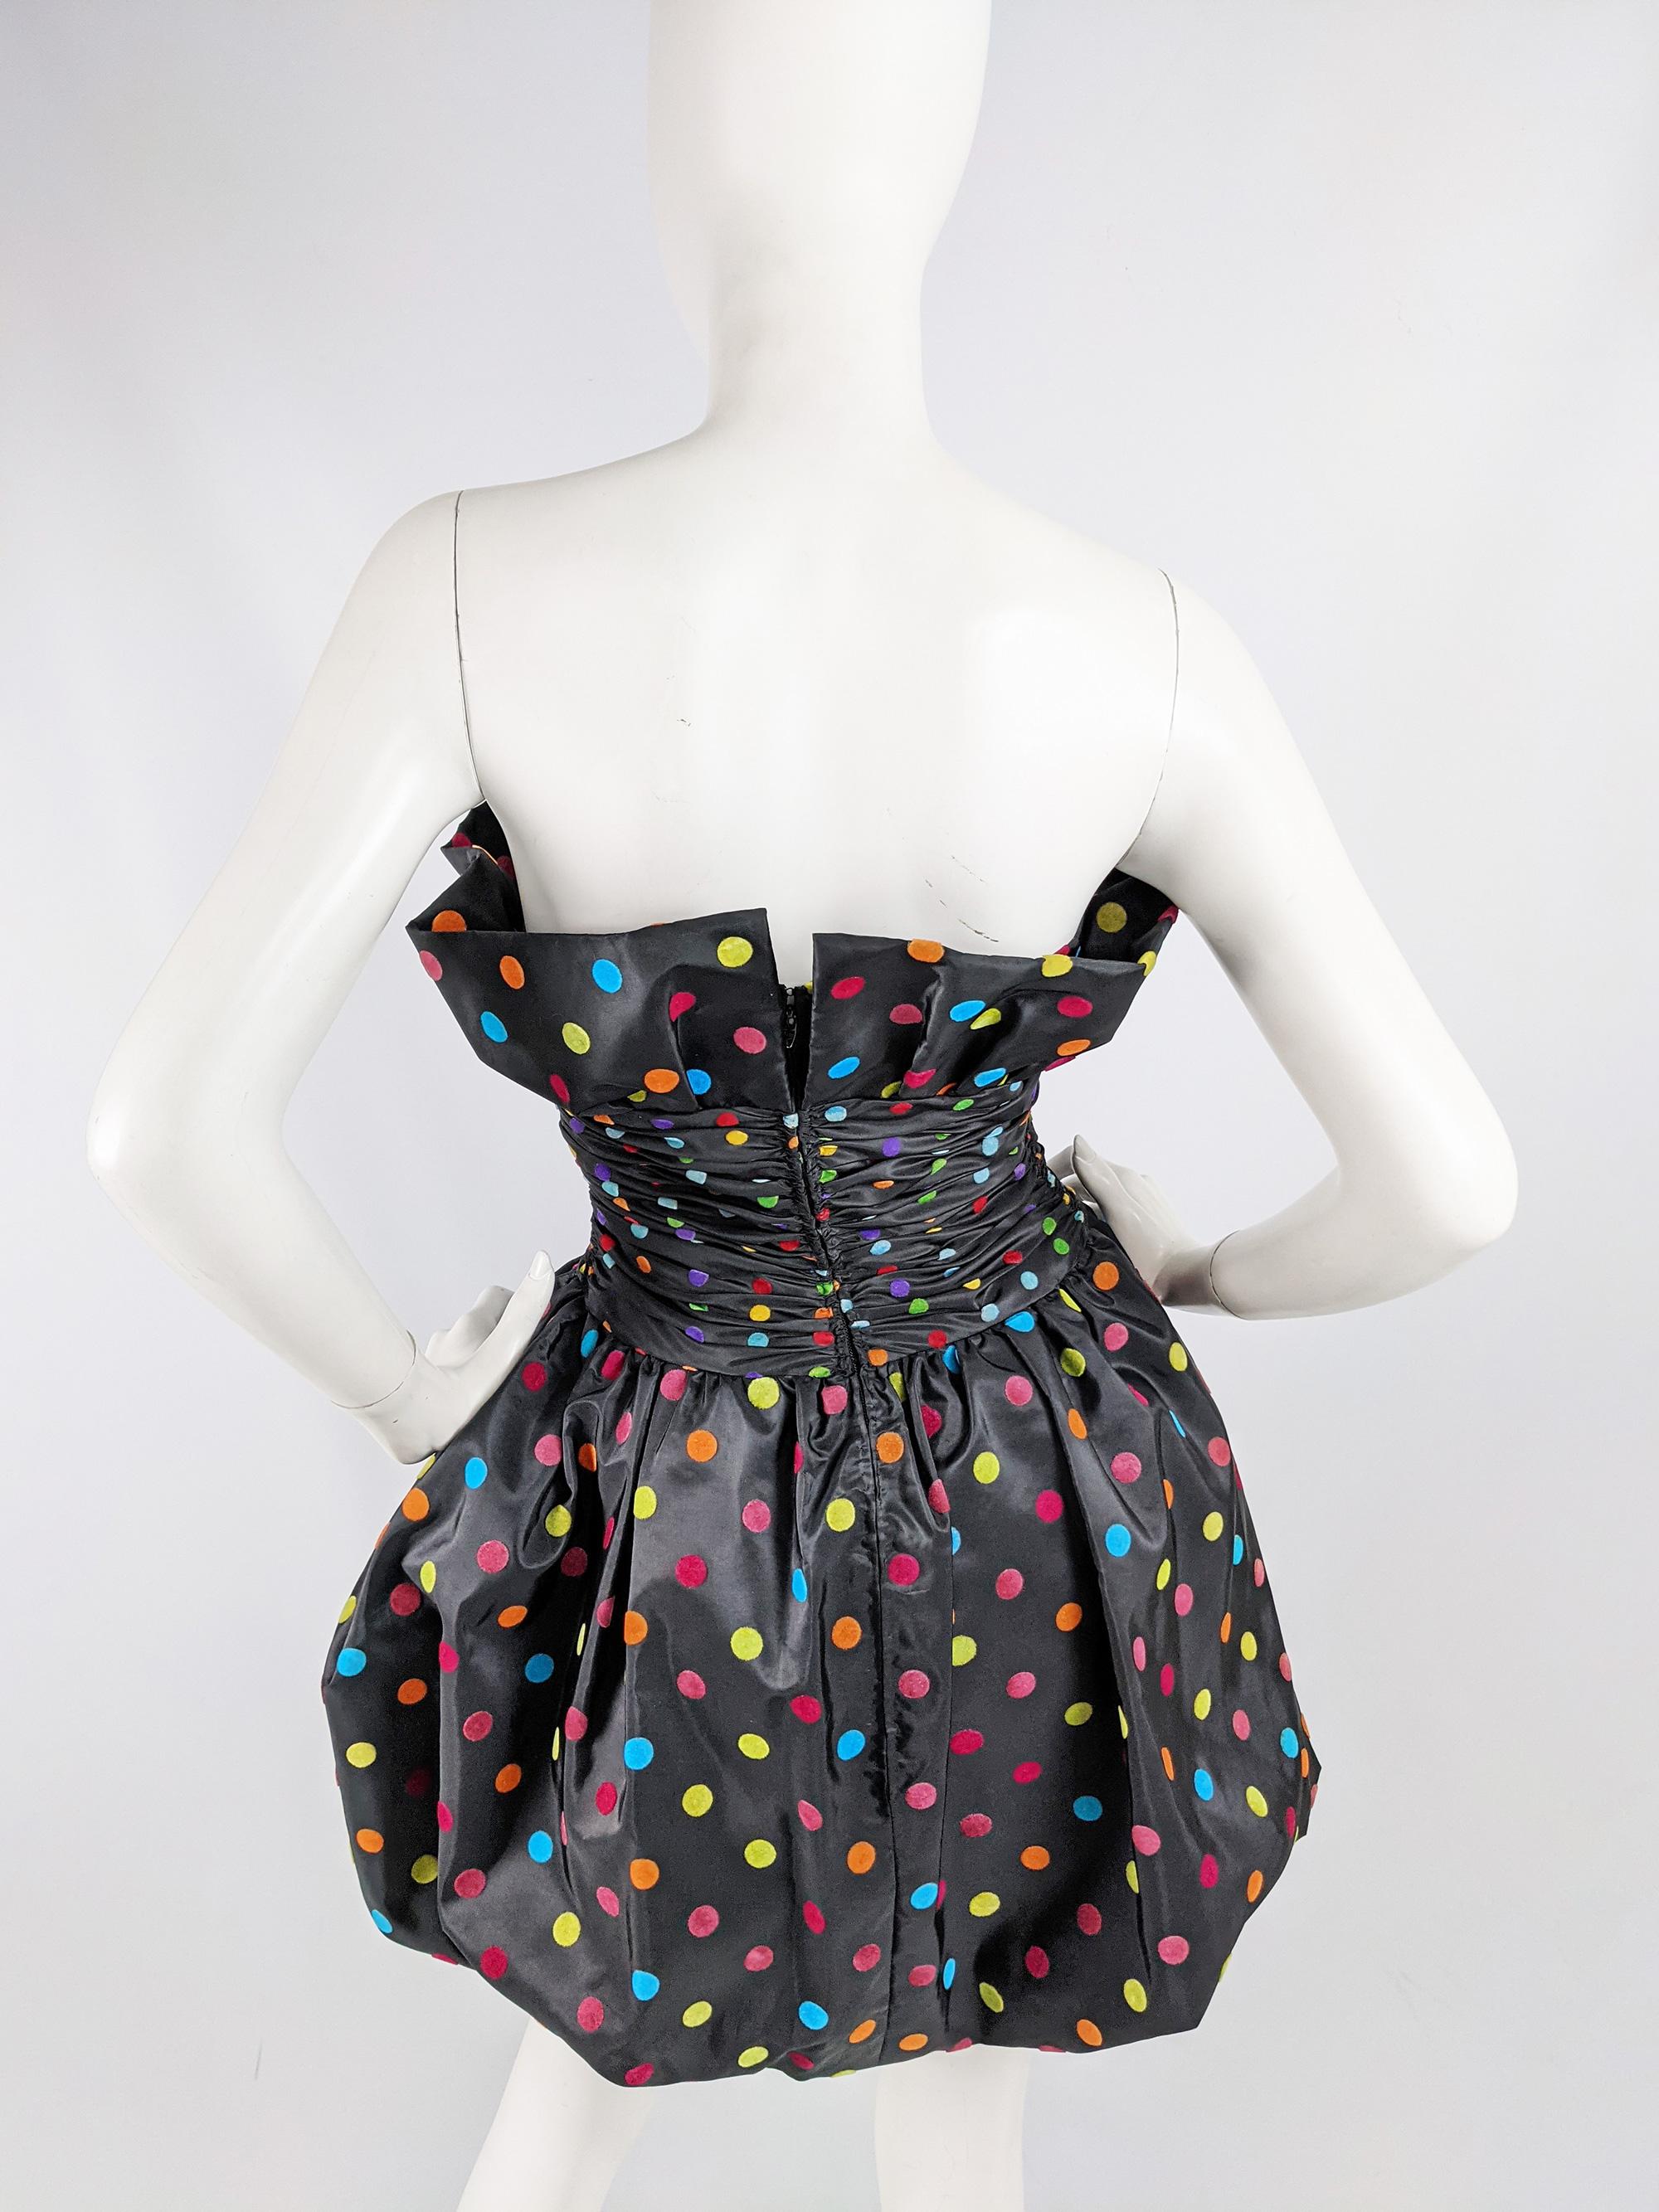 Nina Ricci Vintage 1980s Puffball Party Dress In Good Condition In Doncaster, South Yorkshire